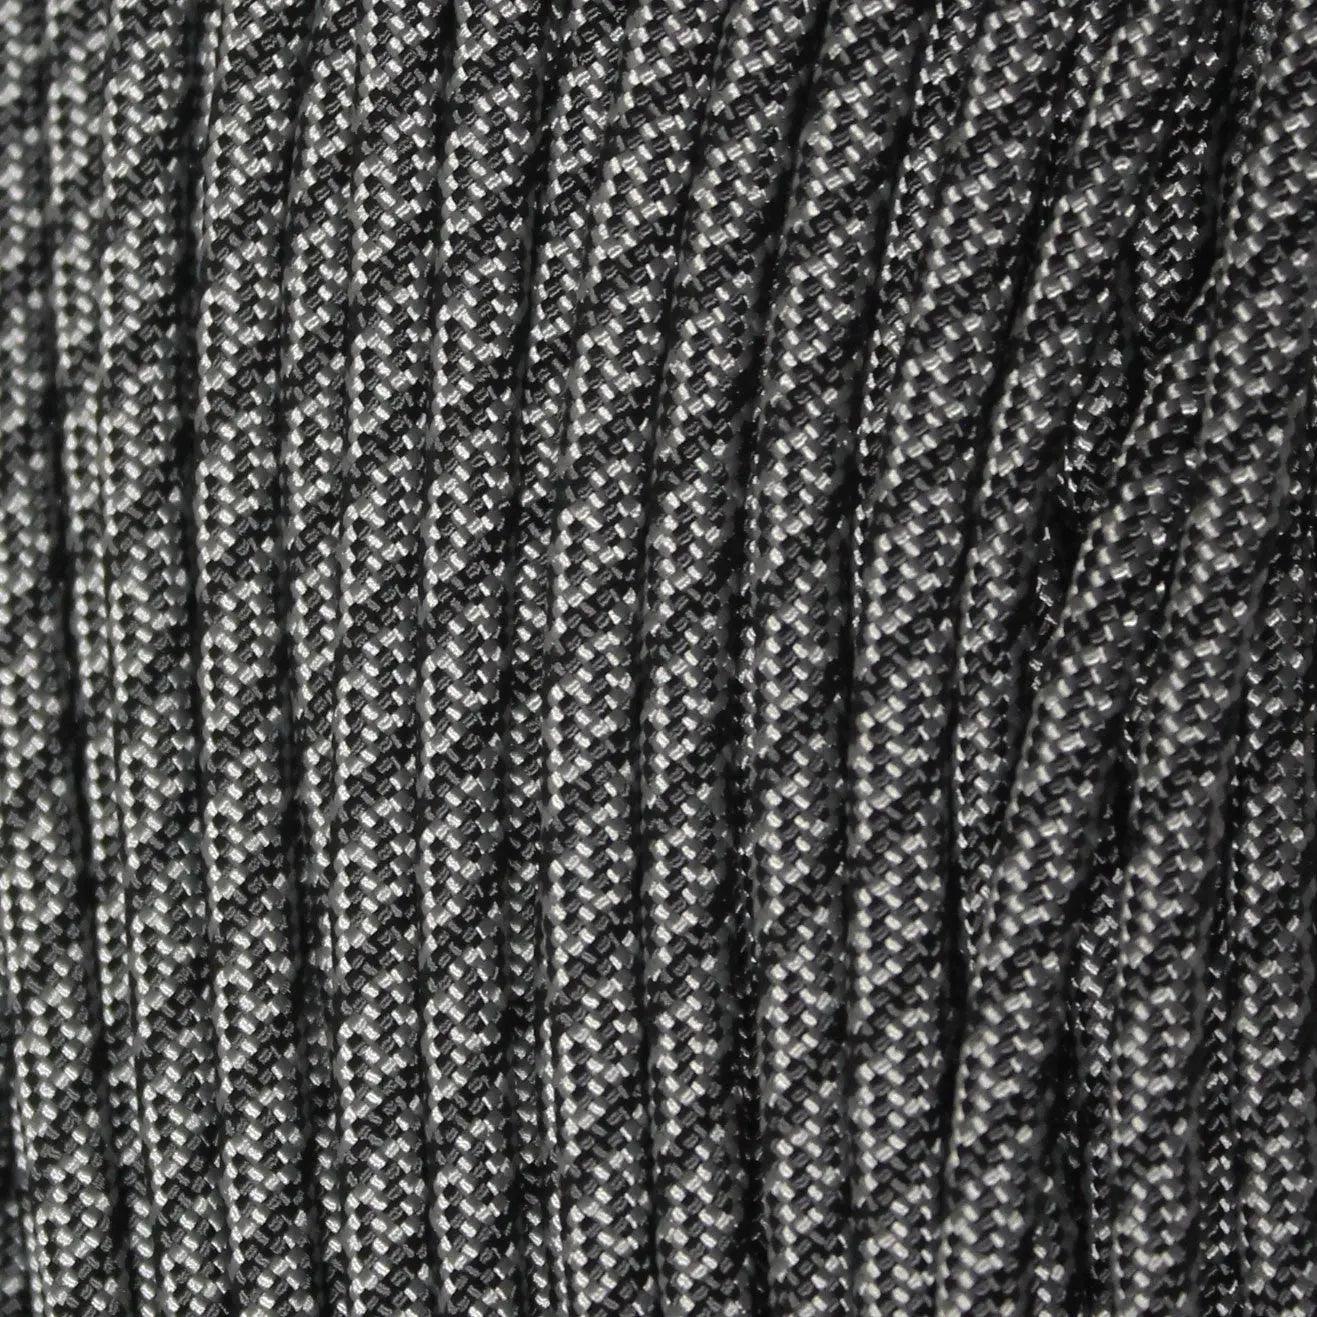 Helix Charcoal Grey with Black 550 Paracord Made in USA (100 FT.)  163- nylon/nylon paracord